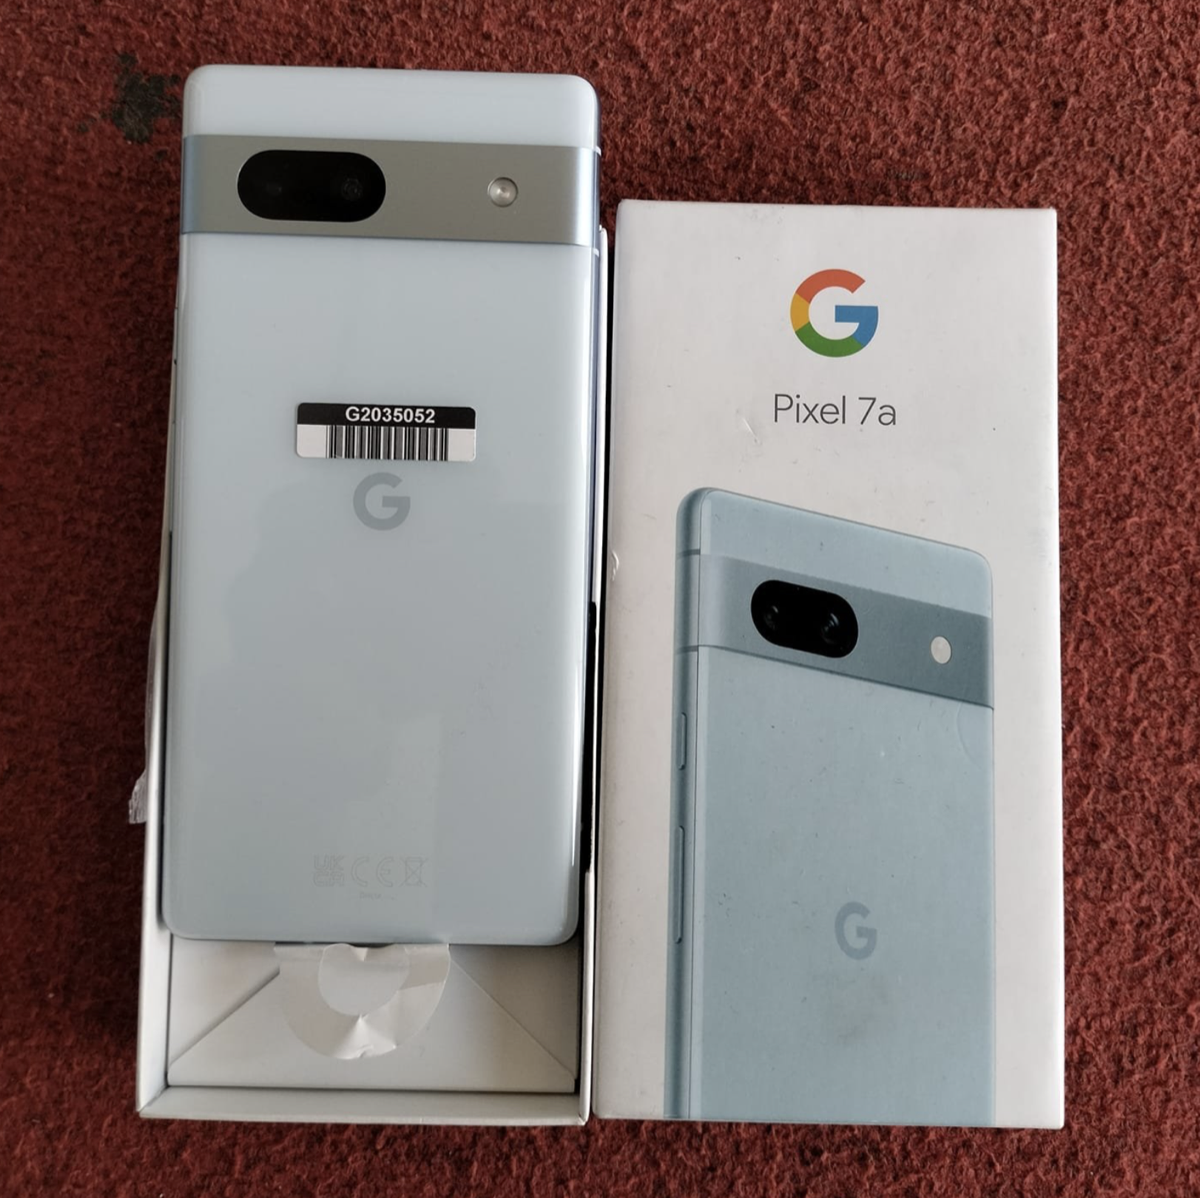 Pixel 7a package